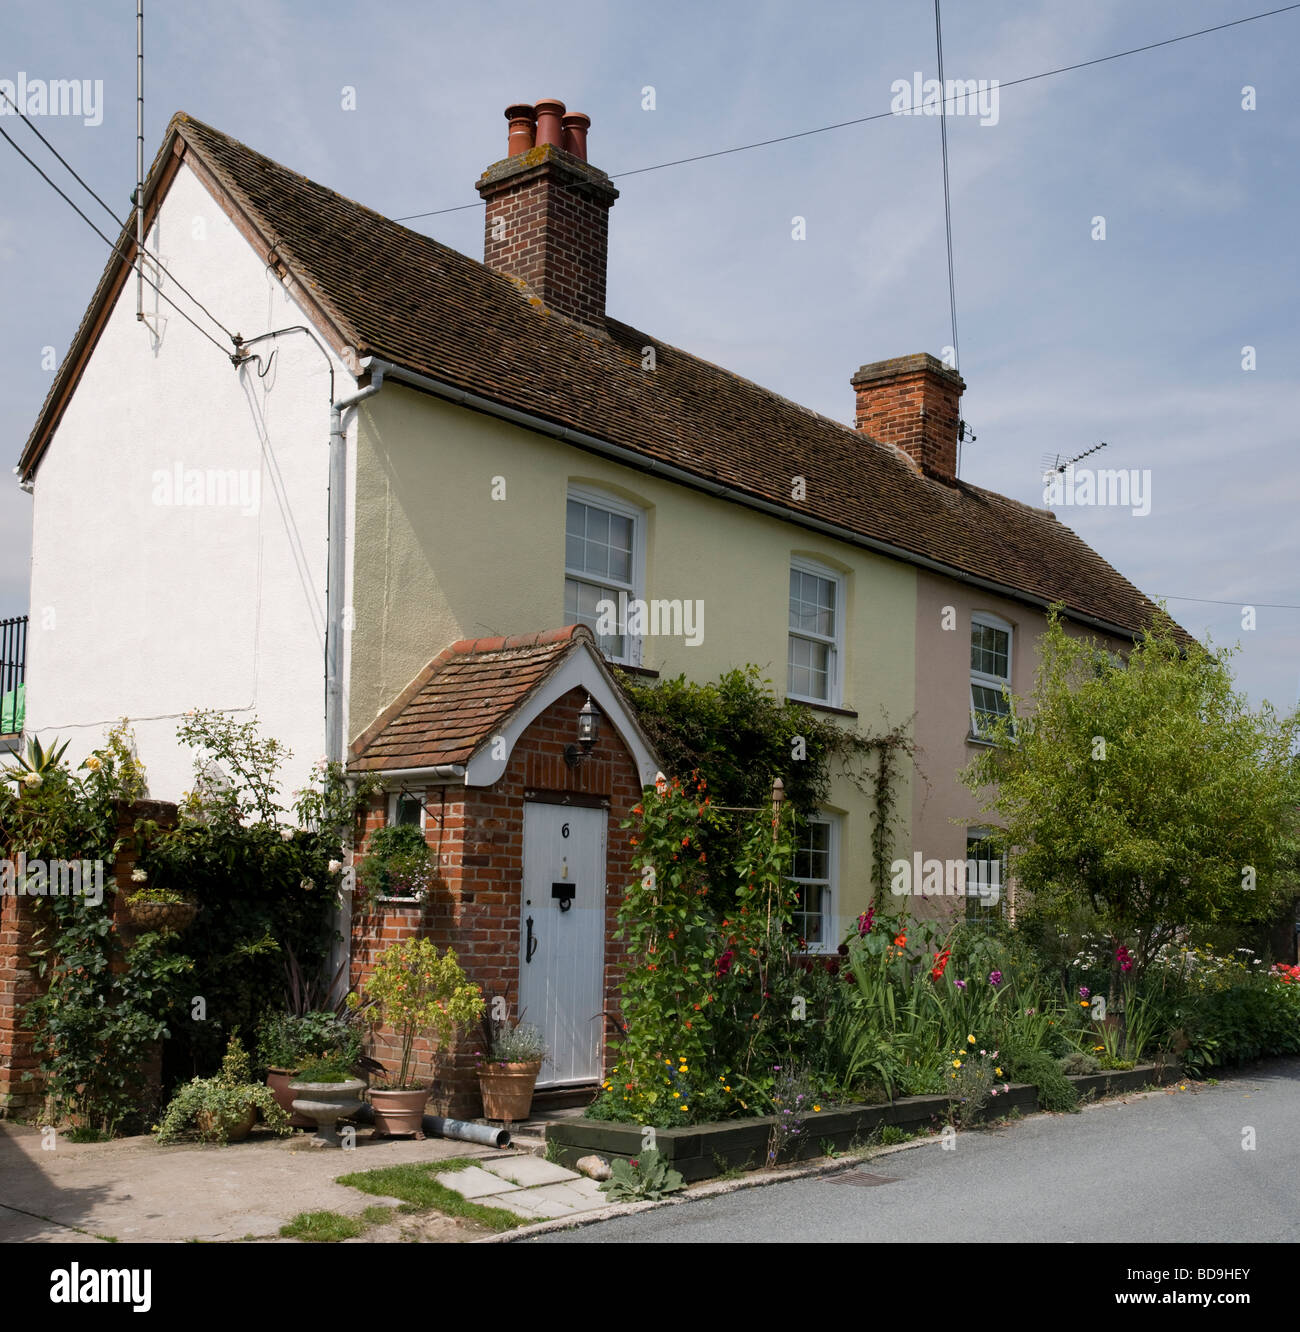 Two semi-detached cottages in Suffolk. Stock Photo